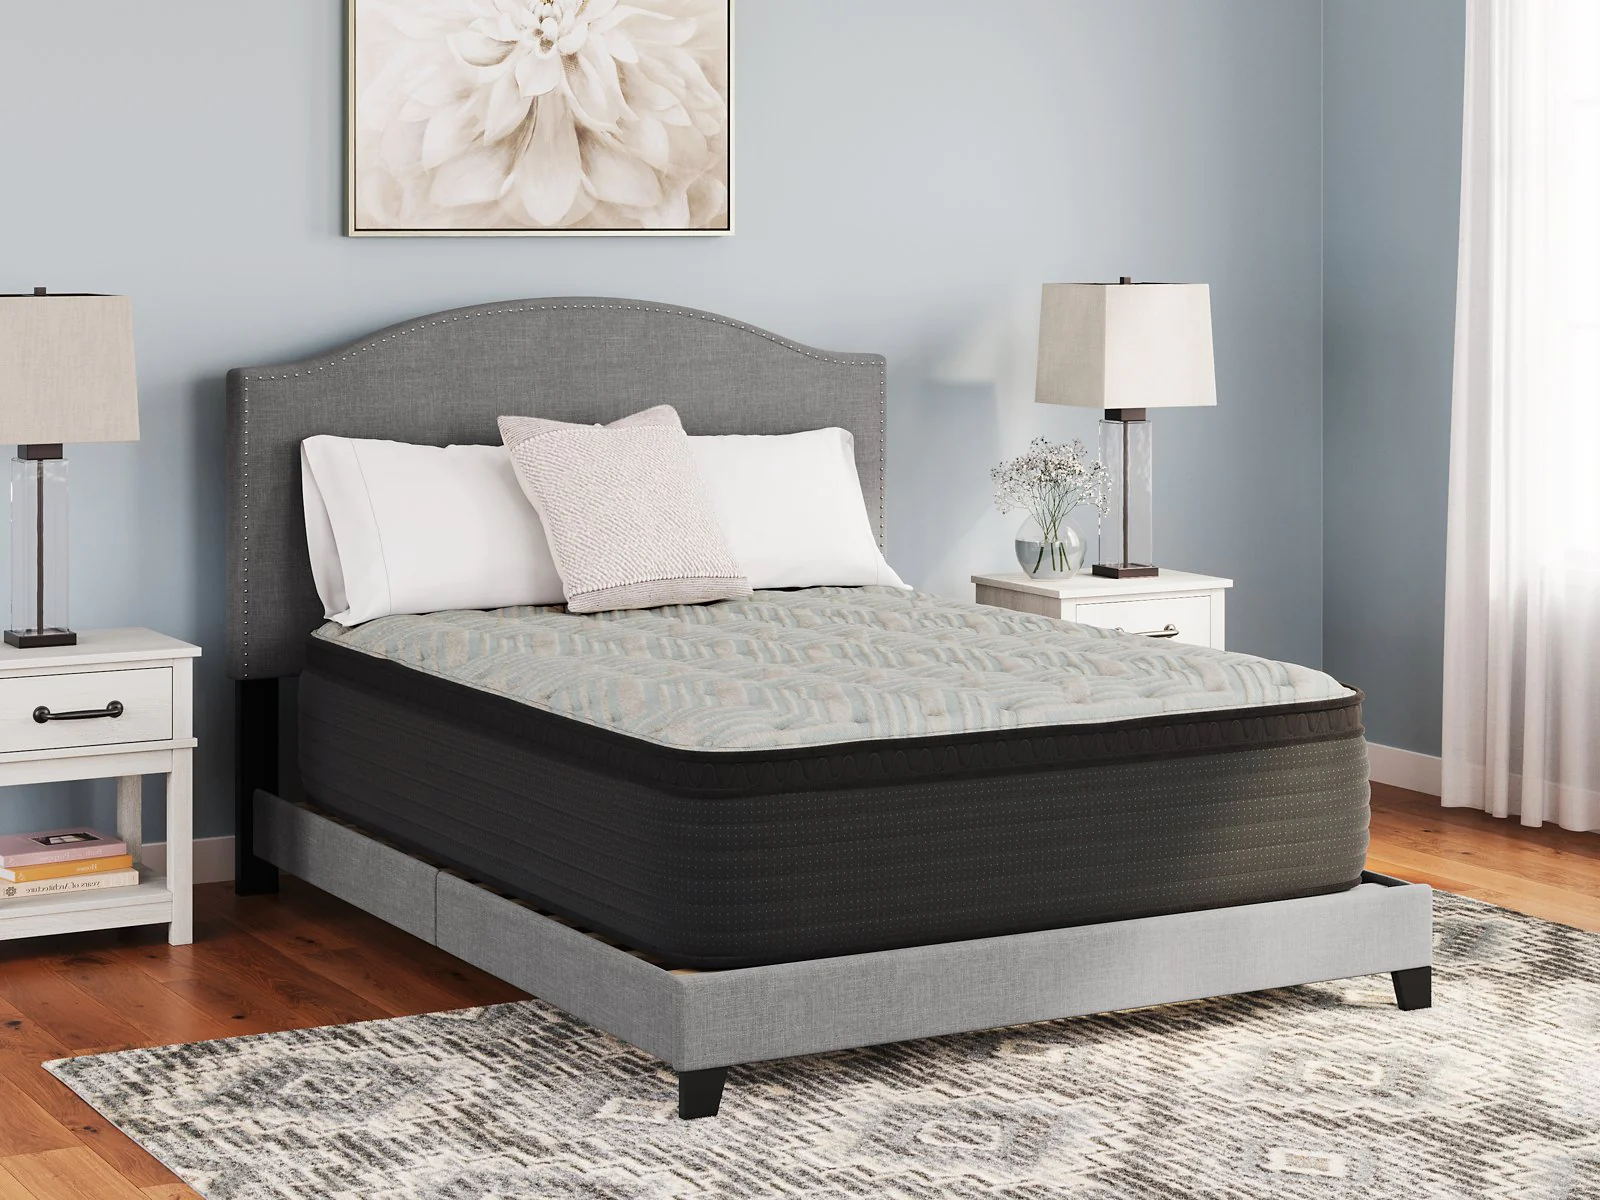 Heritage Sleep Concepts marks 8 years of growth in mattress business